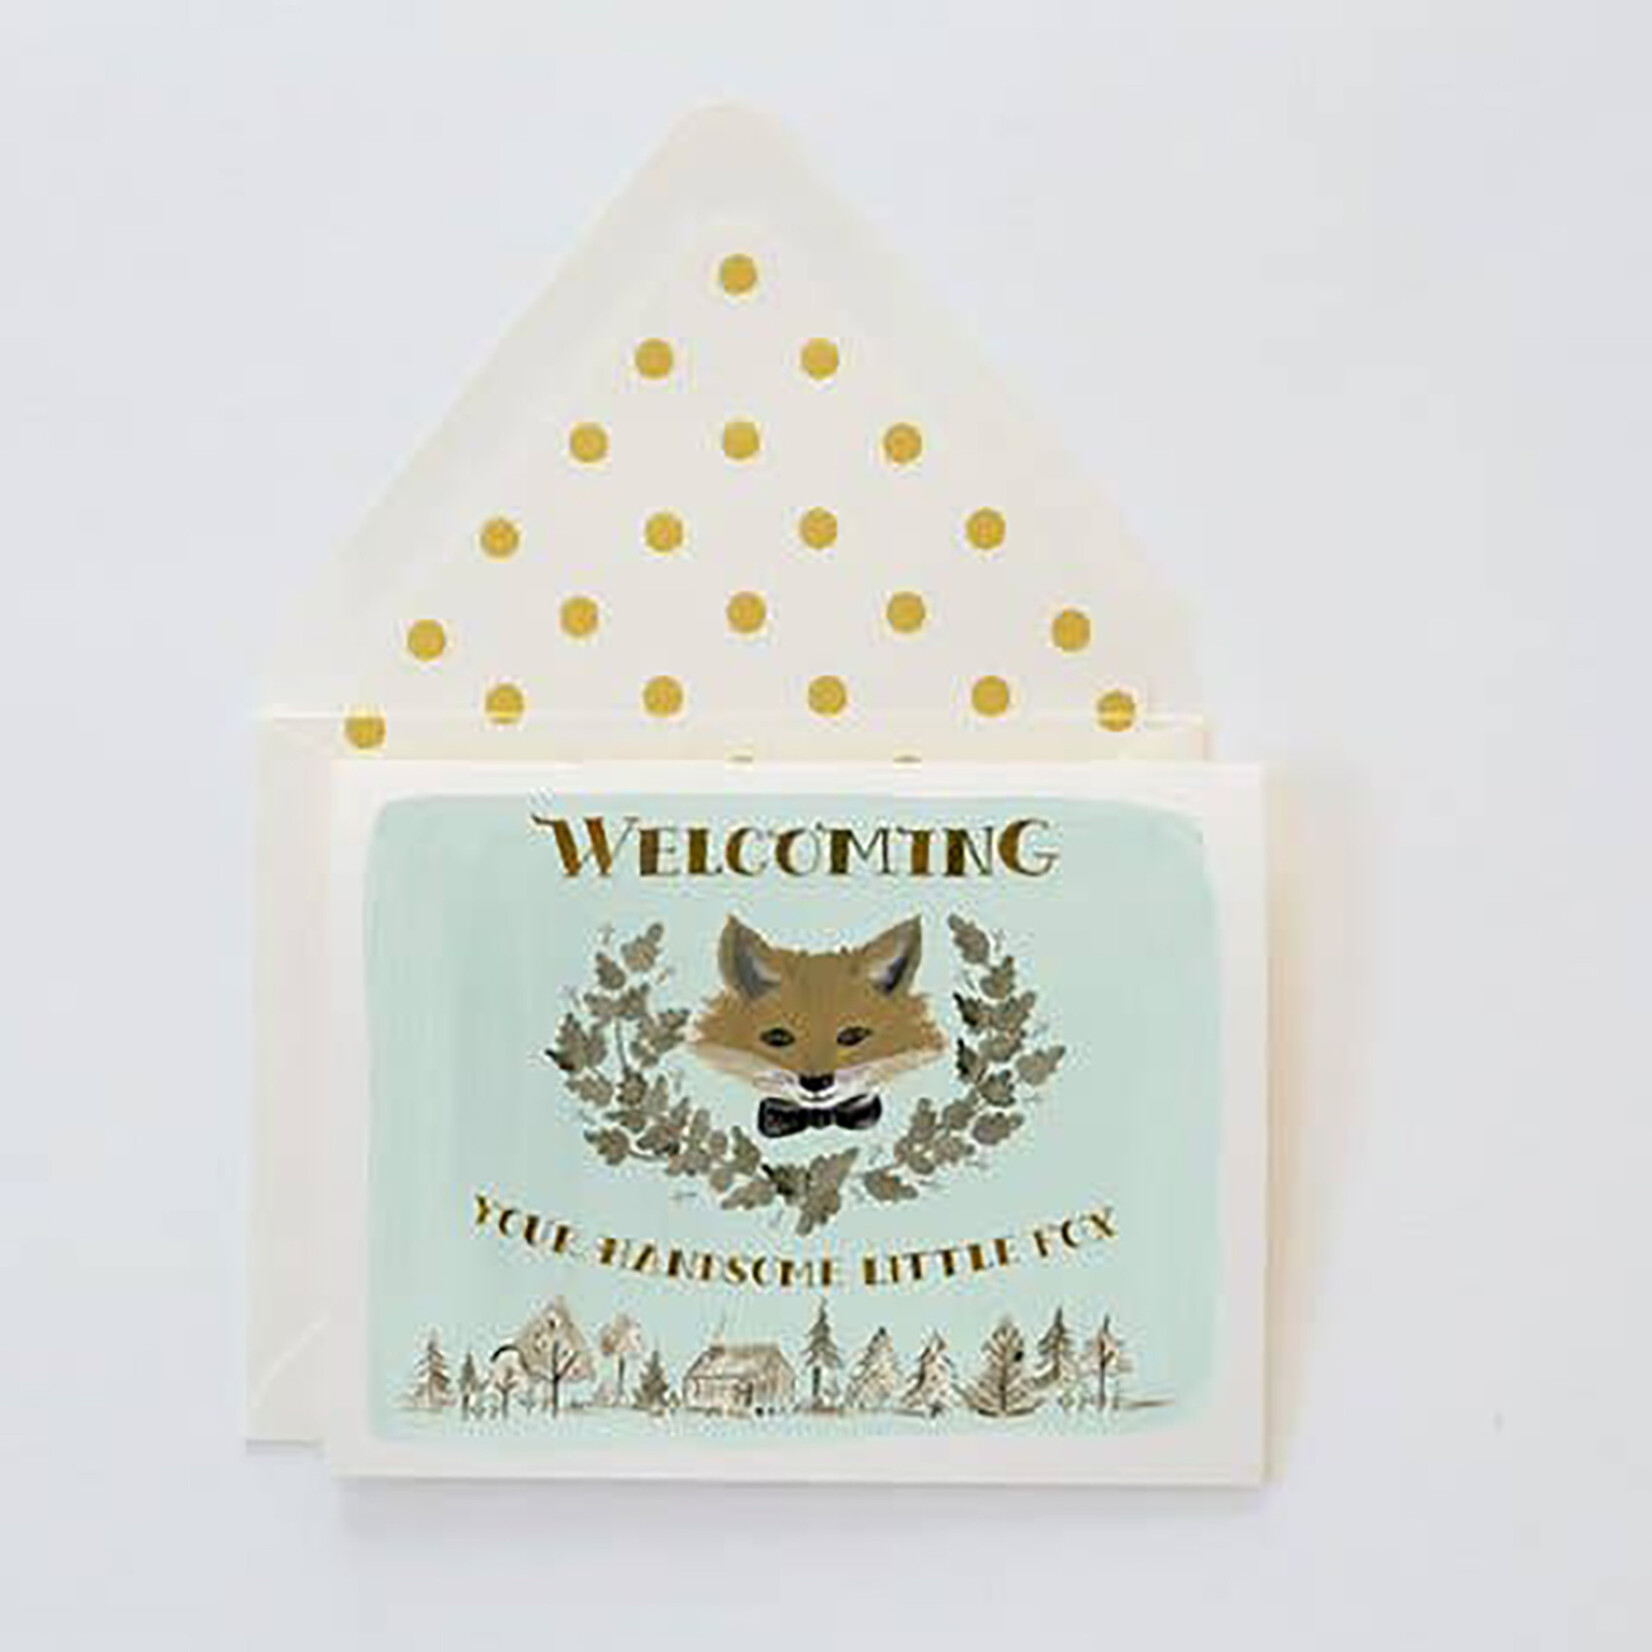 The First Snow Welcome You Handsome Little Fox Card_Blank Inside